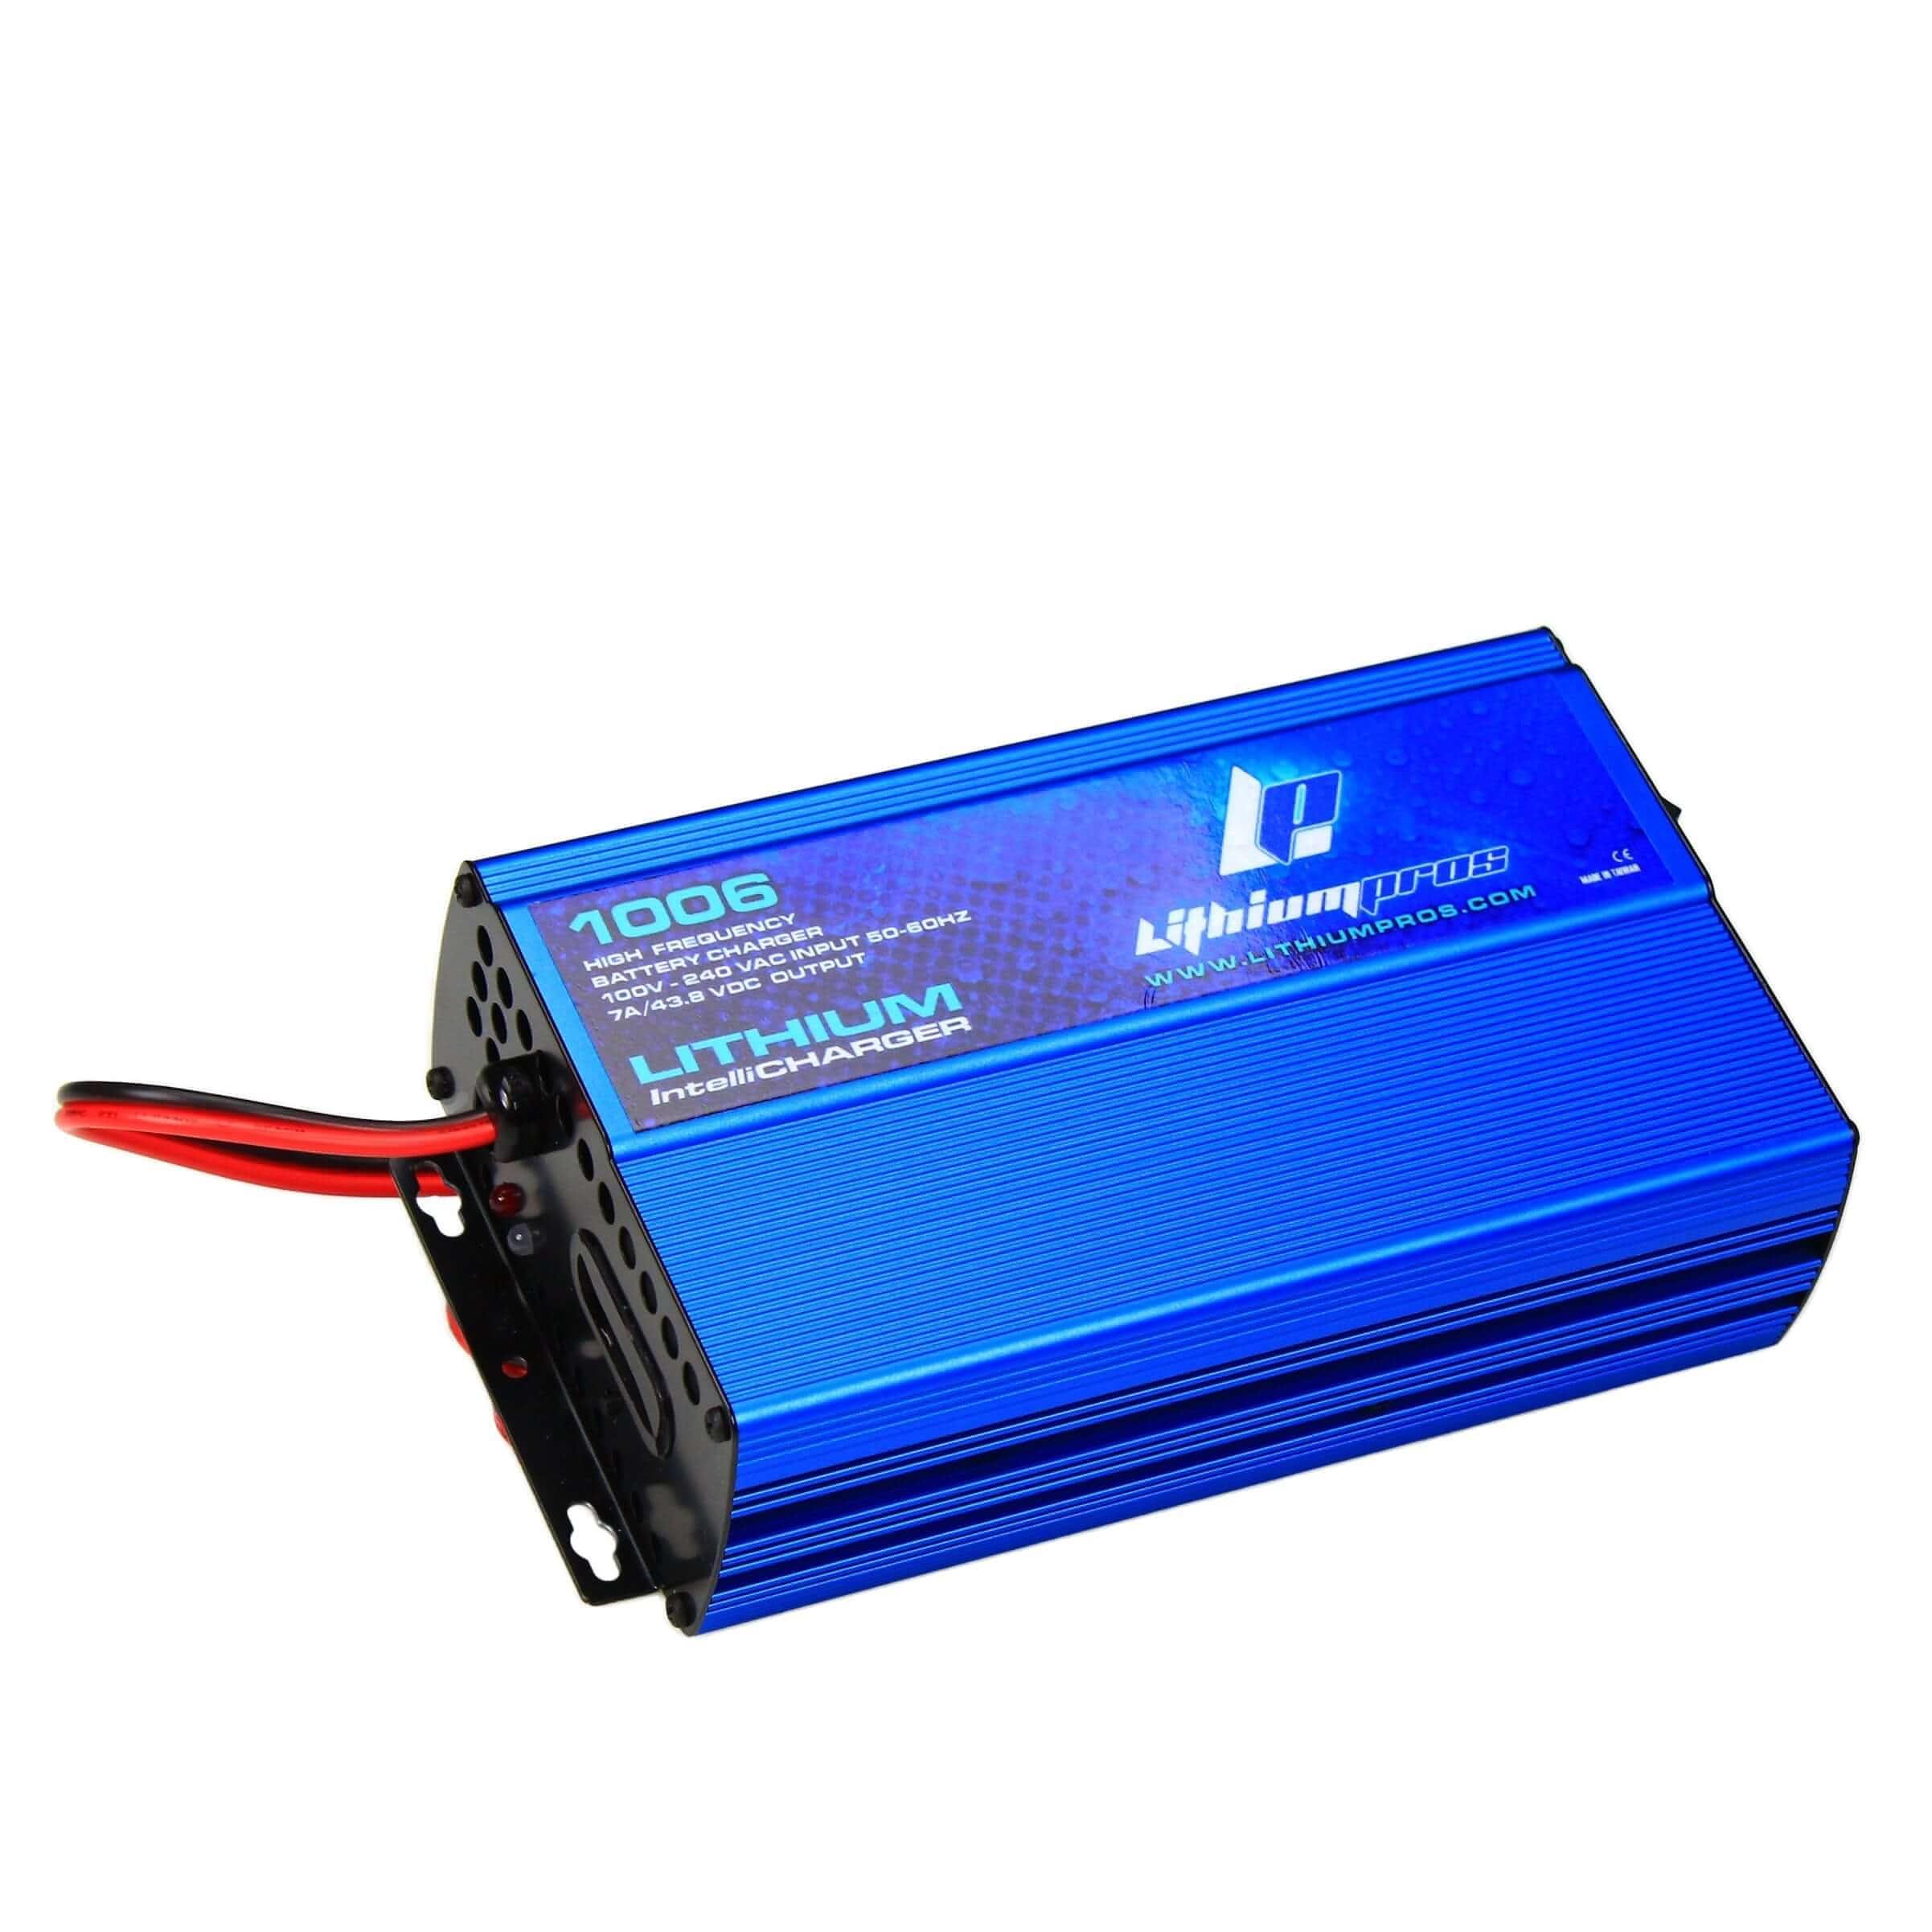 http://lithiumpros.com/cdn/shop/products/1006-36v-7a-lithium-ion-battery-charger-693101.jpg?v=1659541529